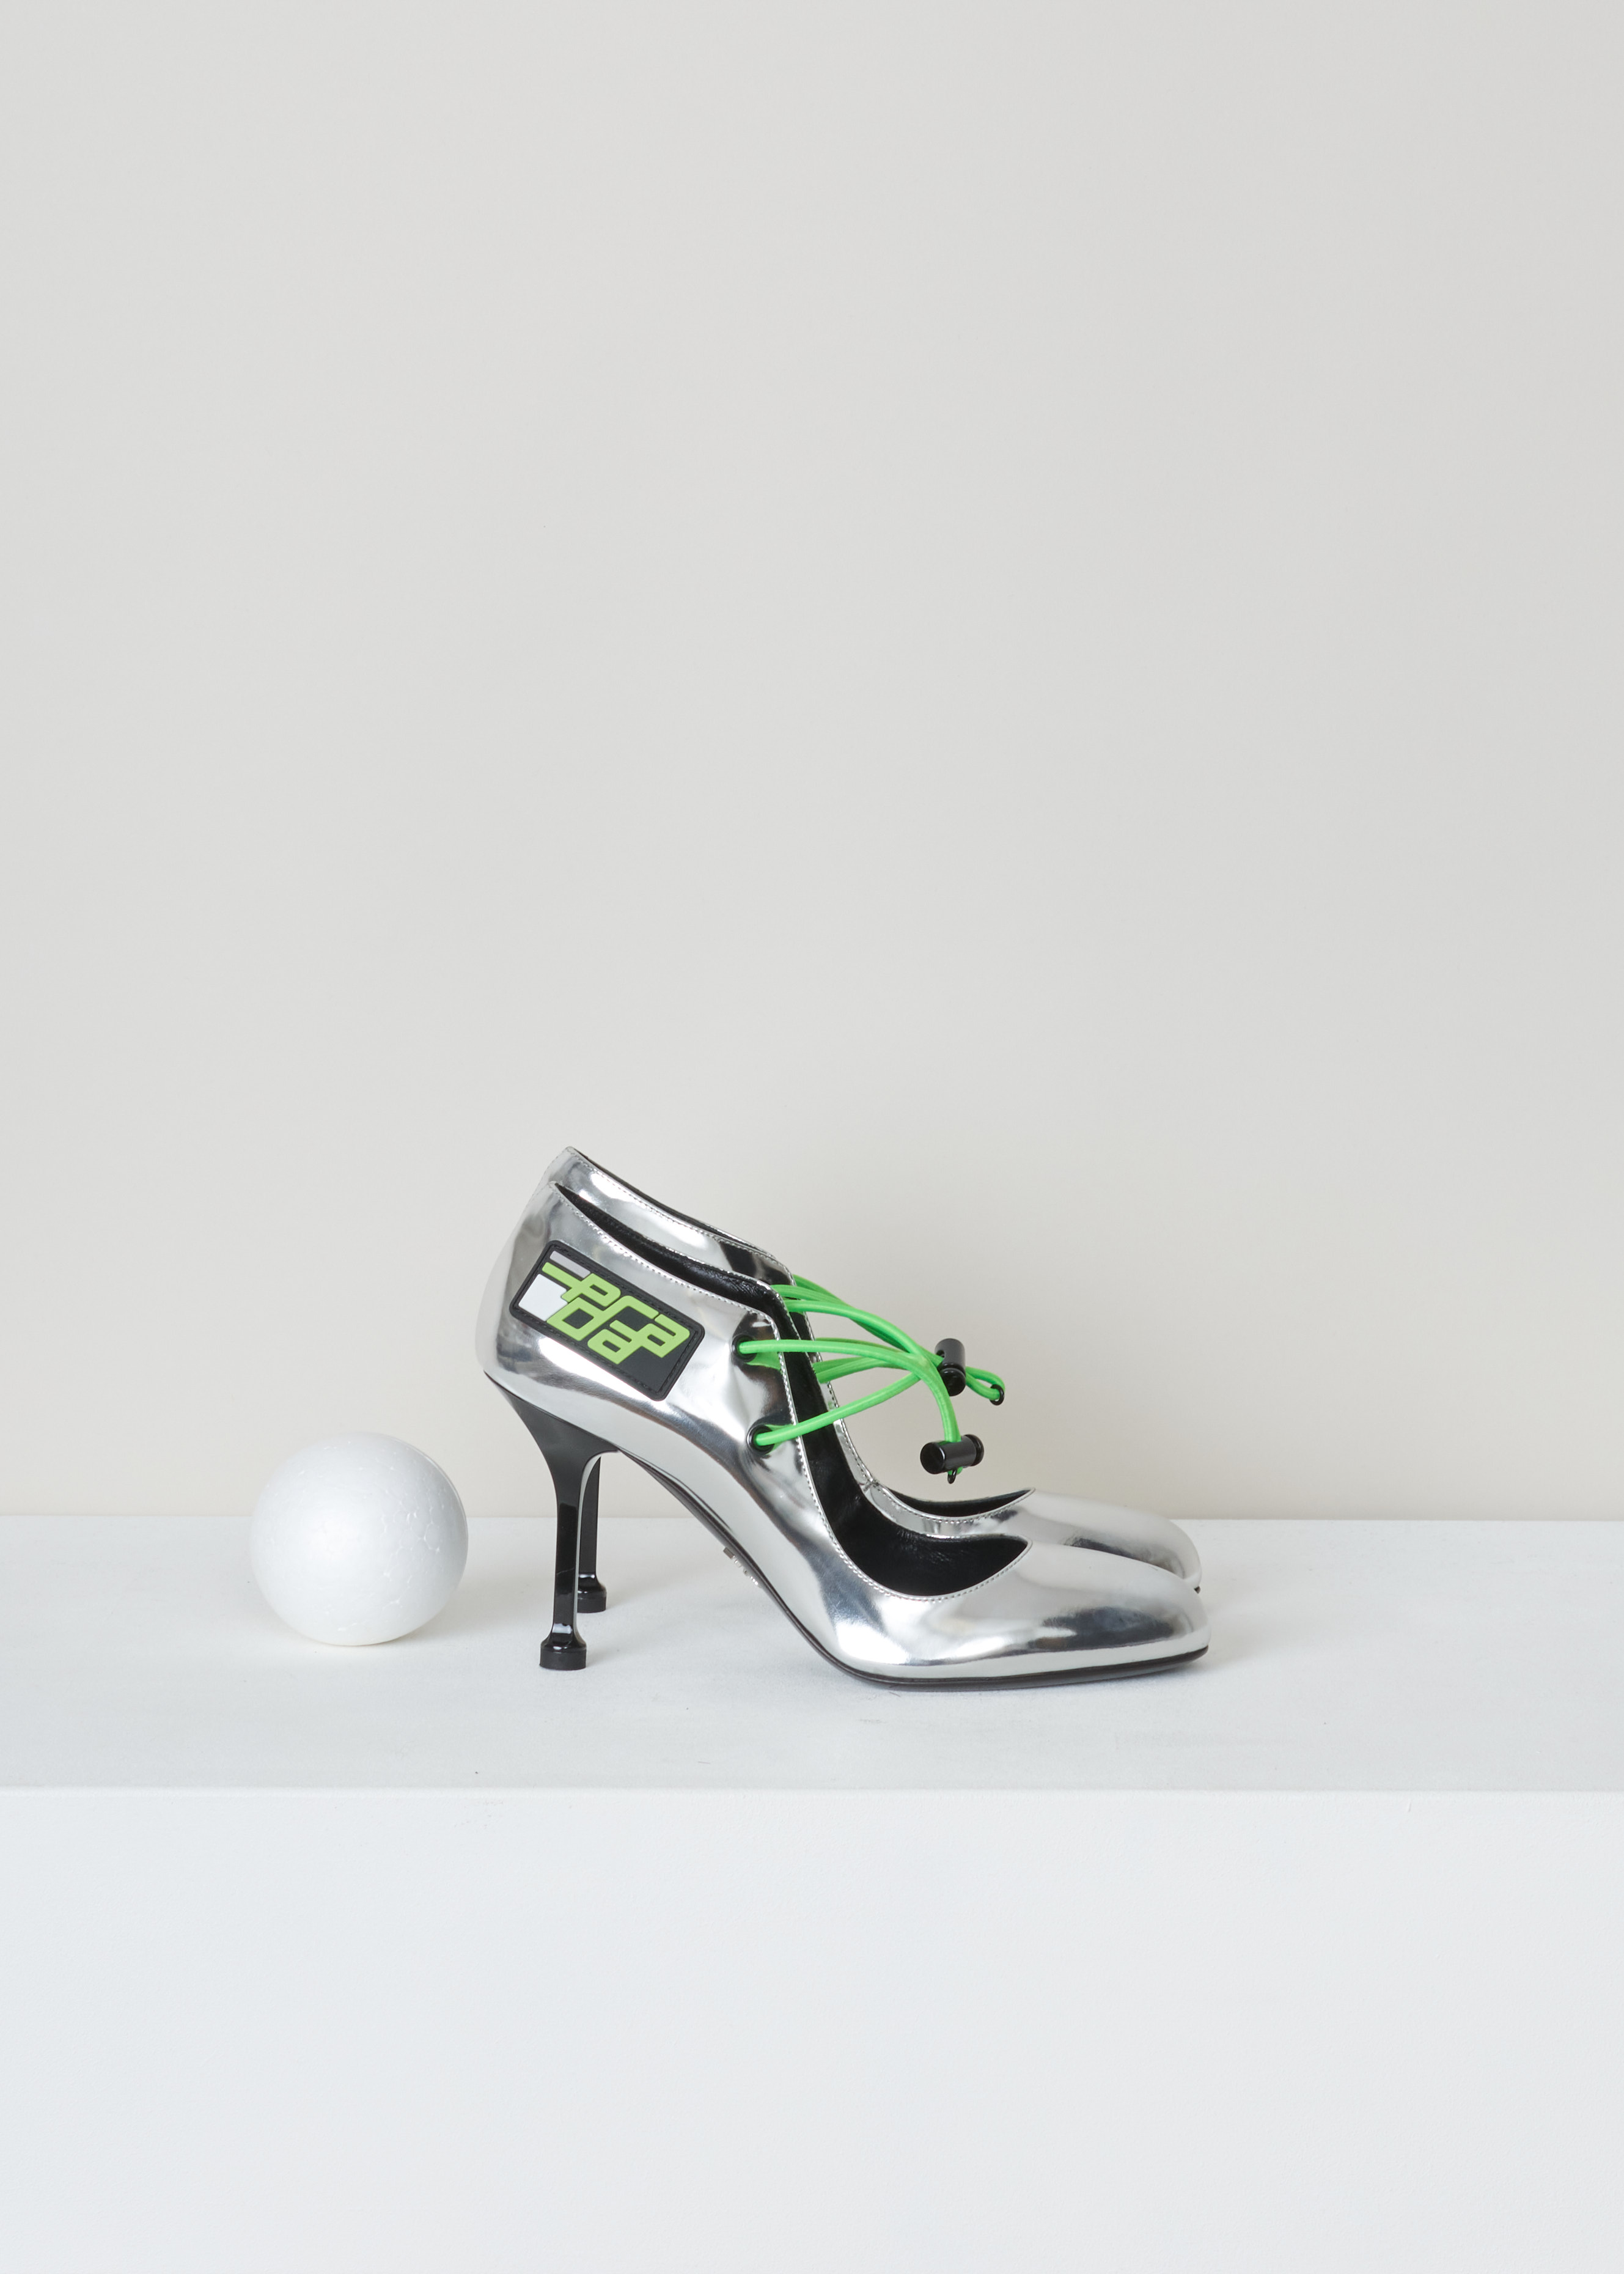 Prada Silver elastic strap mary jane Vit_Metal_1I127L_FOXNO argento verde side. Silver coated Mary Jane pumps with green elastic straps and a Prada logo patch on the side.